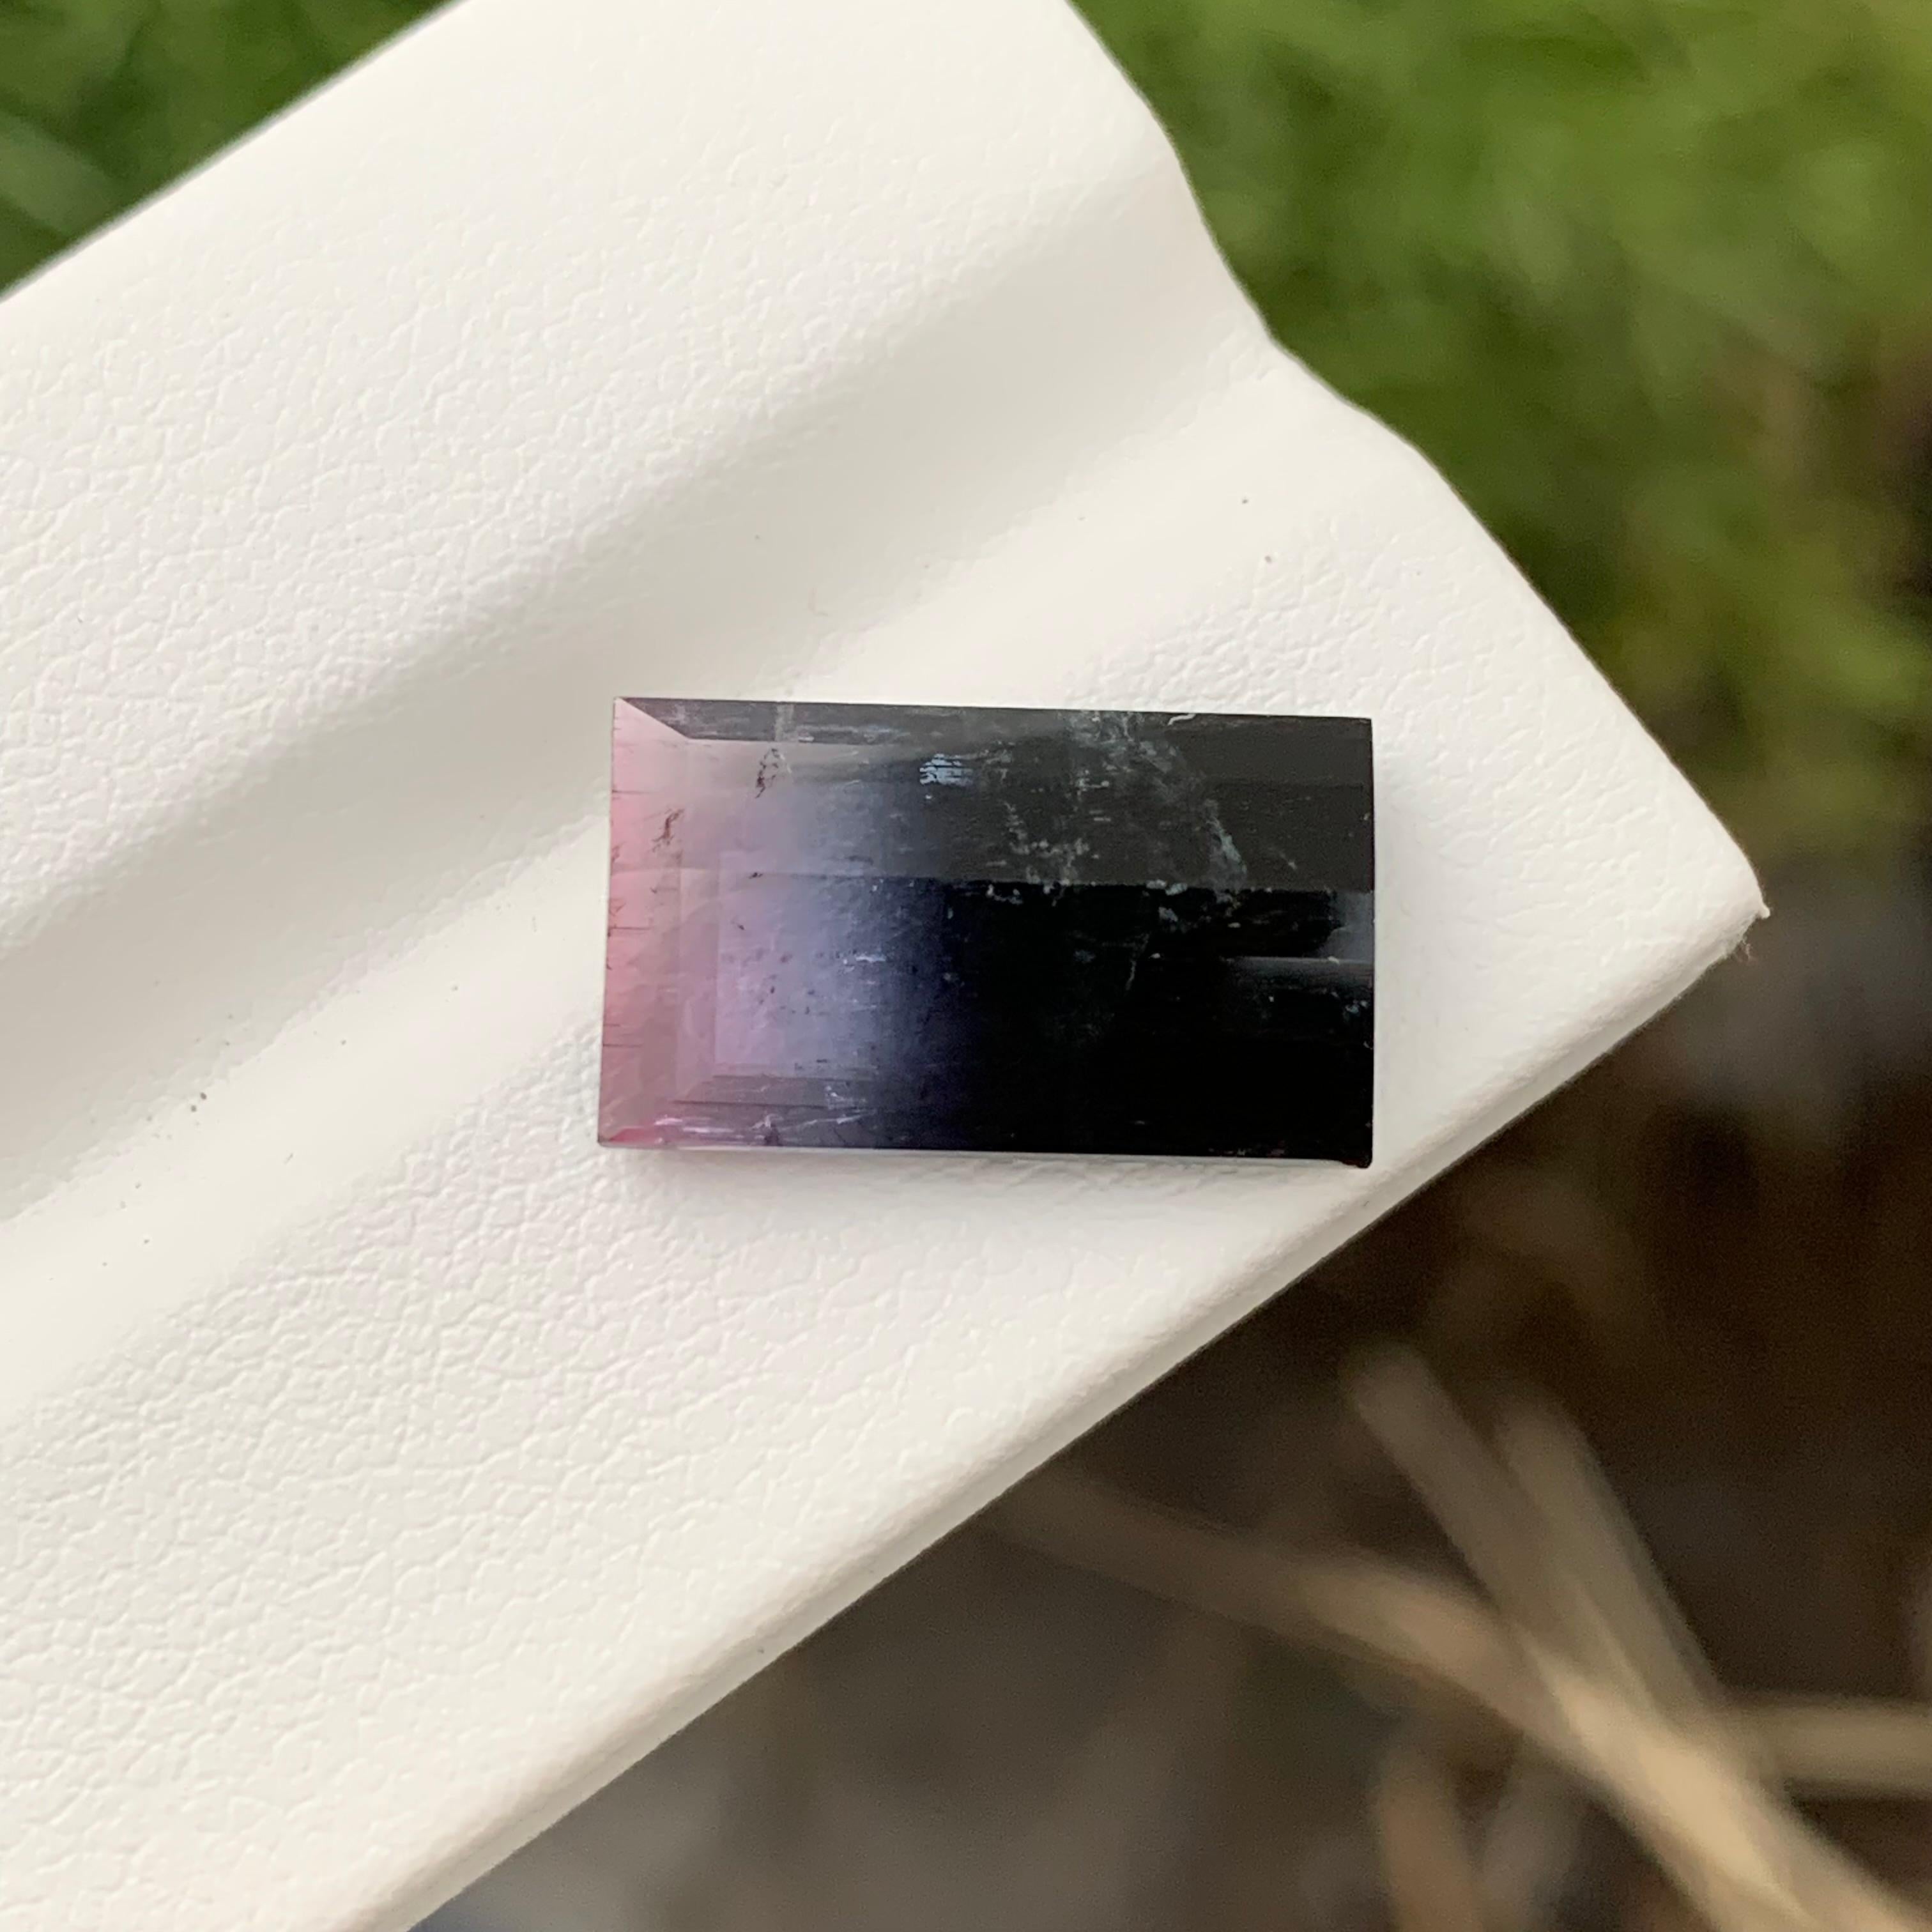 Loose Bicolor Tourmaline 
Weight: 8.60 Carats 
Dimension: 16.2x9.7x5.4 Mm
Origin: Skardu Pakistan 
Shape: Baguette
Treatment: Non
Color: Black & Pink
Black Pink bicolor tourmaline is a mesmerizing gemstone renowned for its striking combination of